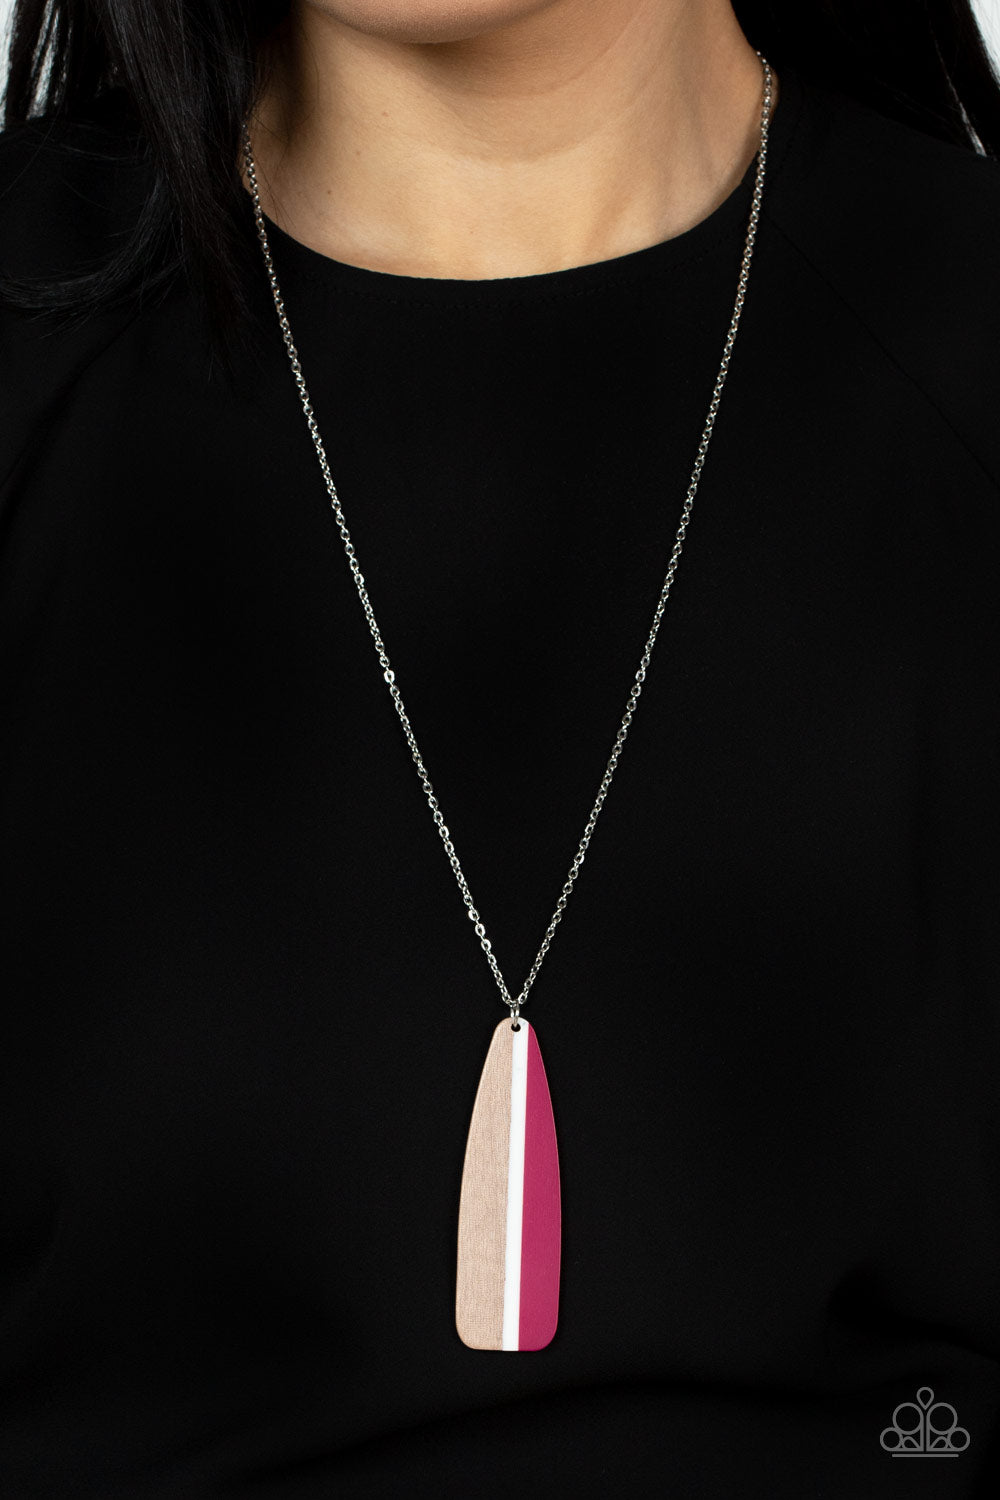 Paparazzi Necklaces - Grab a Paddle - Pink